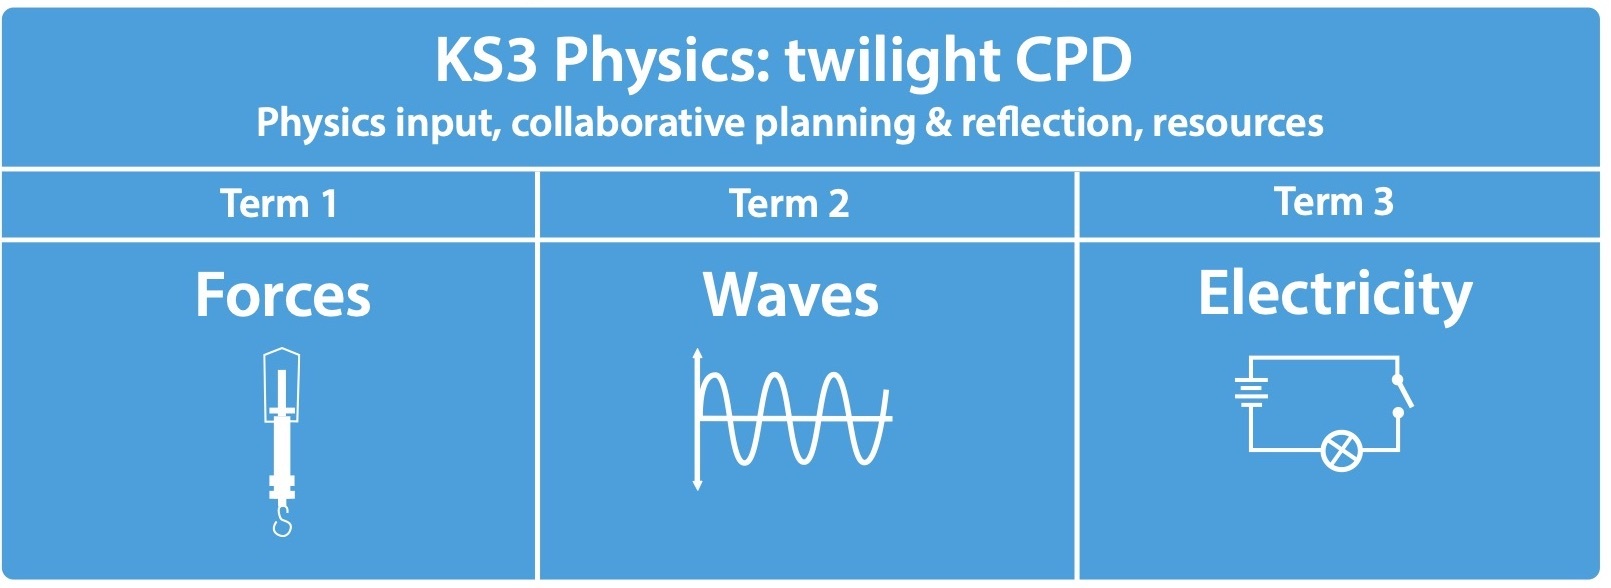 KS3 termly-twilight CPD sessions: physic input, collaborative planning & reflection, resources. Term 1 forces, Term 2 waves, Term 3 electricity 